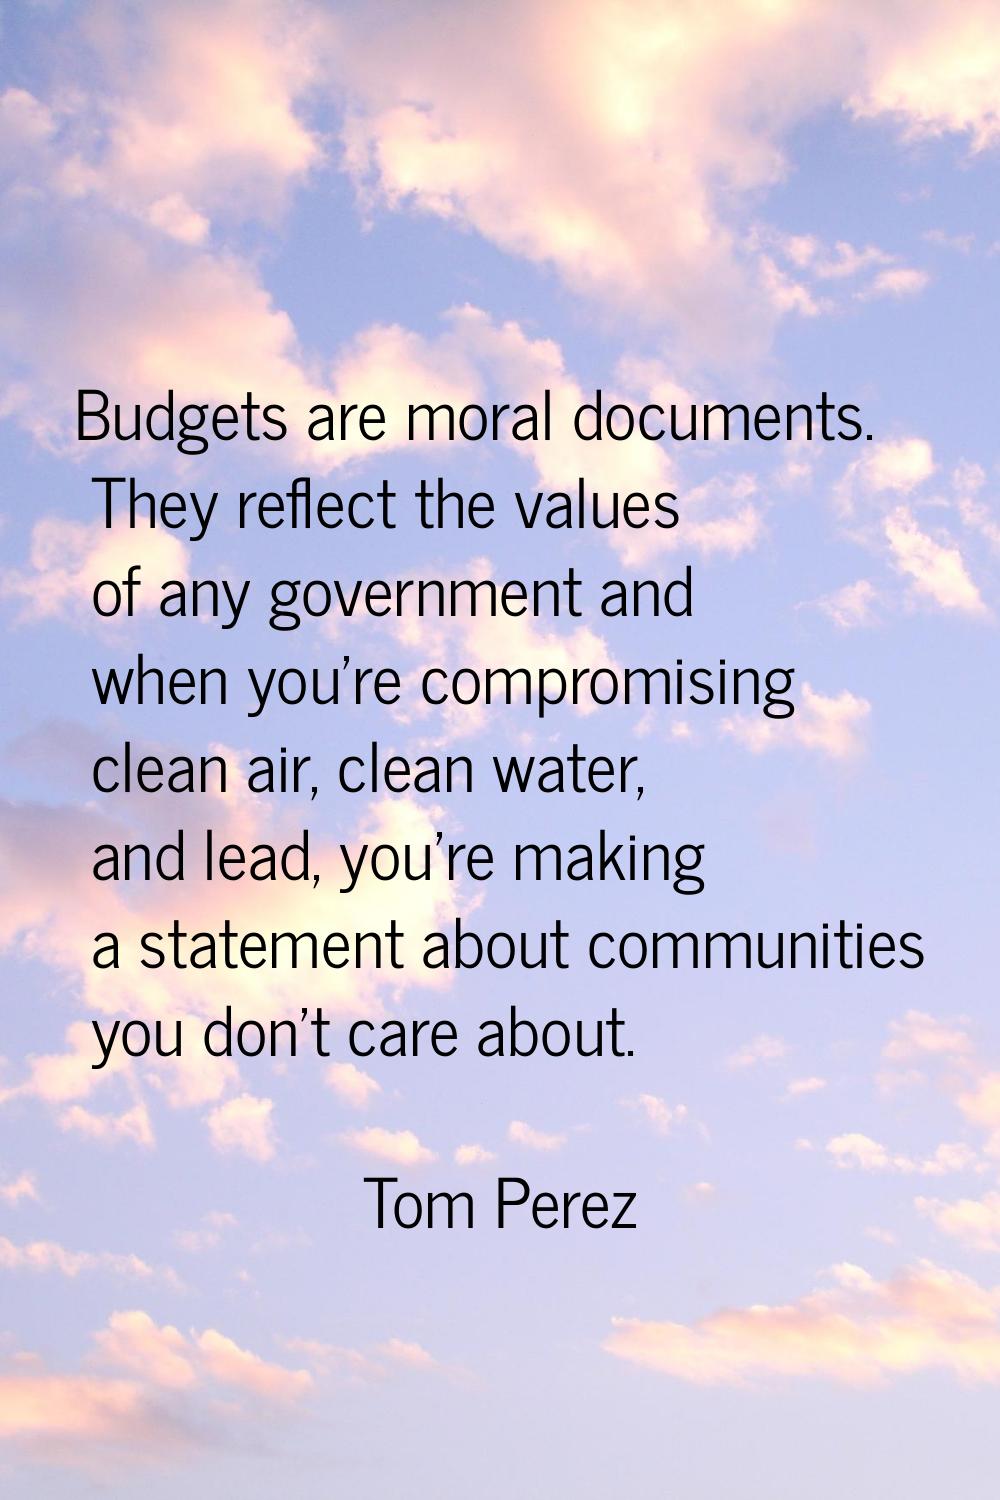 Budgets are moral documents. They reflect the values of any government and when you're compromising